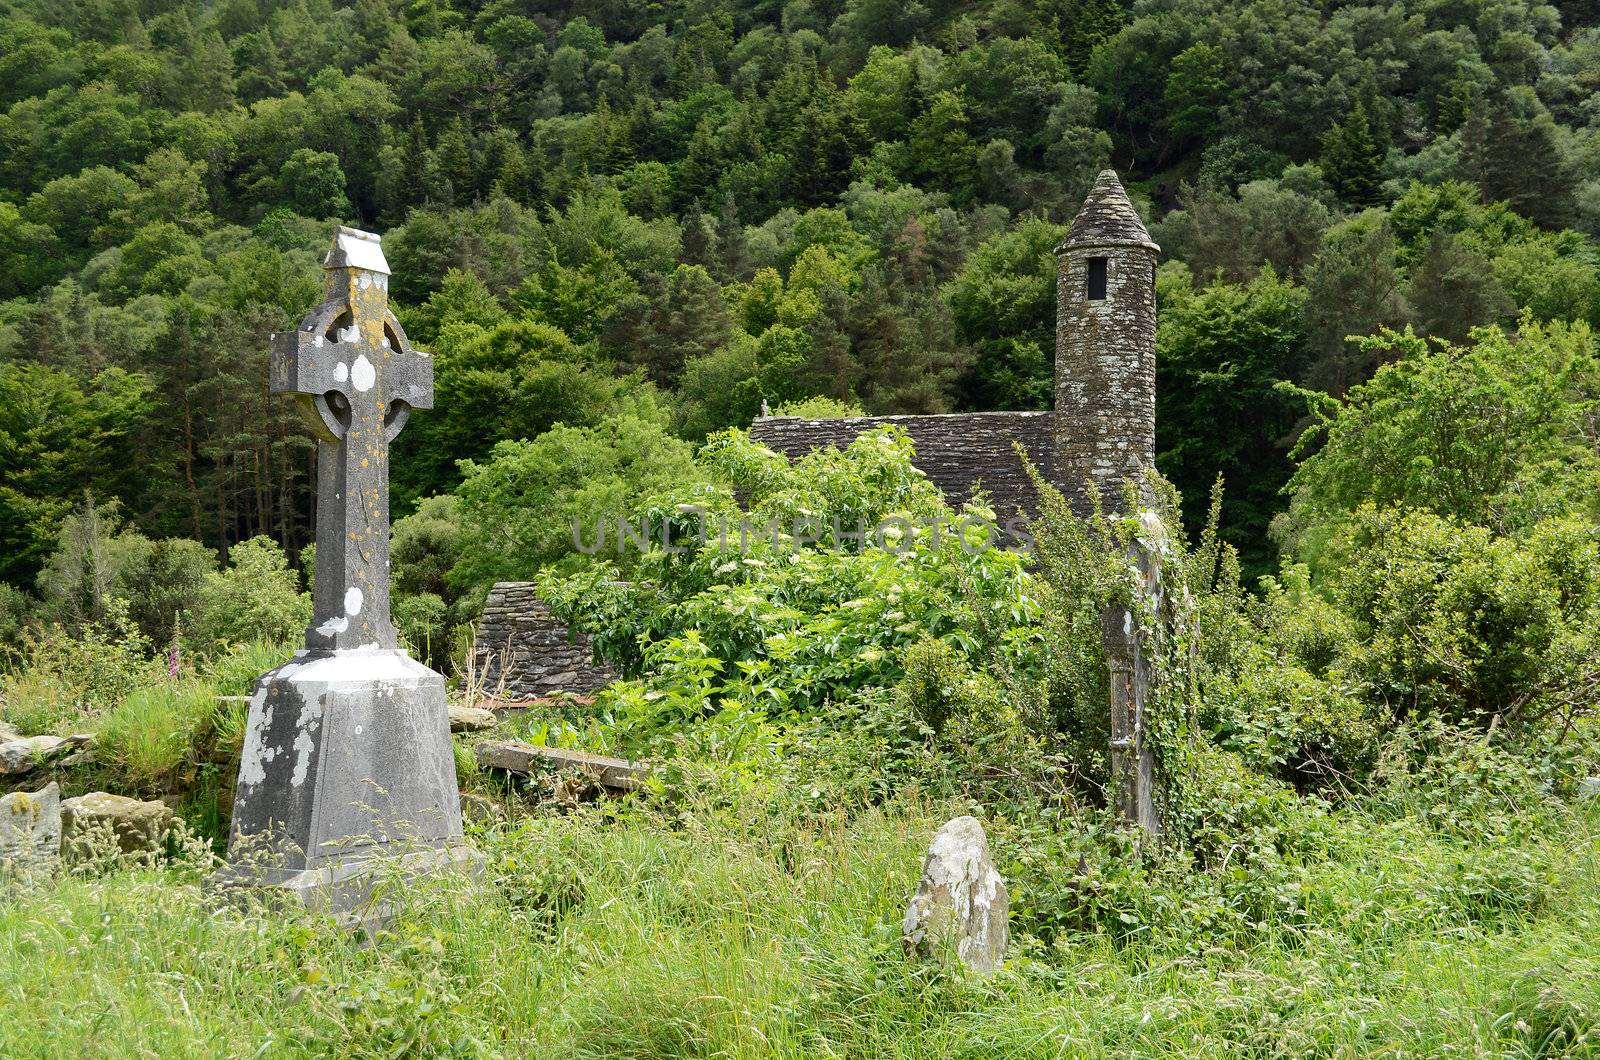 A celtic cross on the overgrown graveyard next to the medieval church of St. Kevin at the monastic heritage site Glendalough, south of Dublin in Ireland.